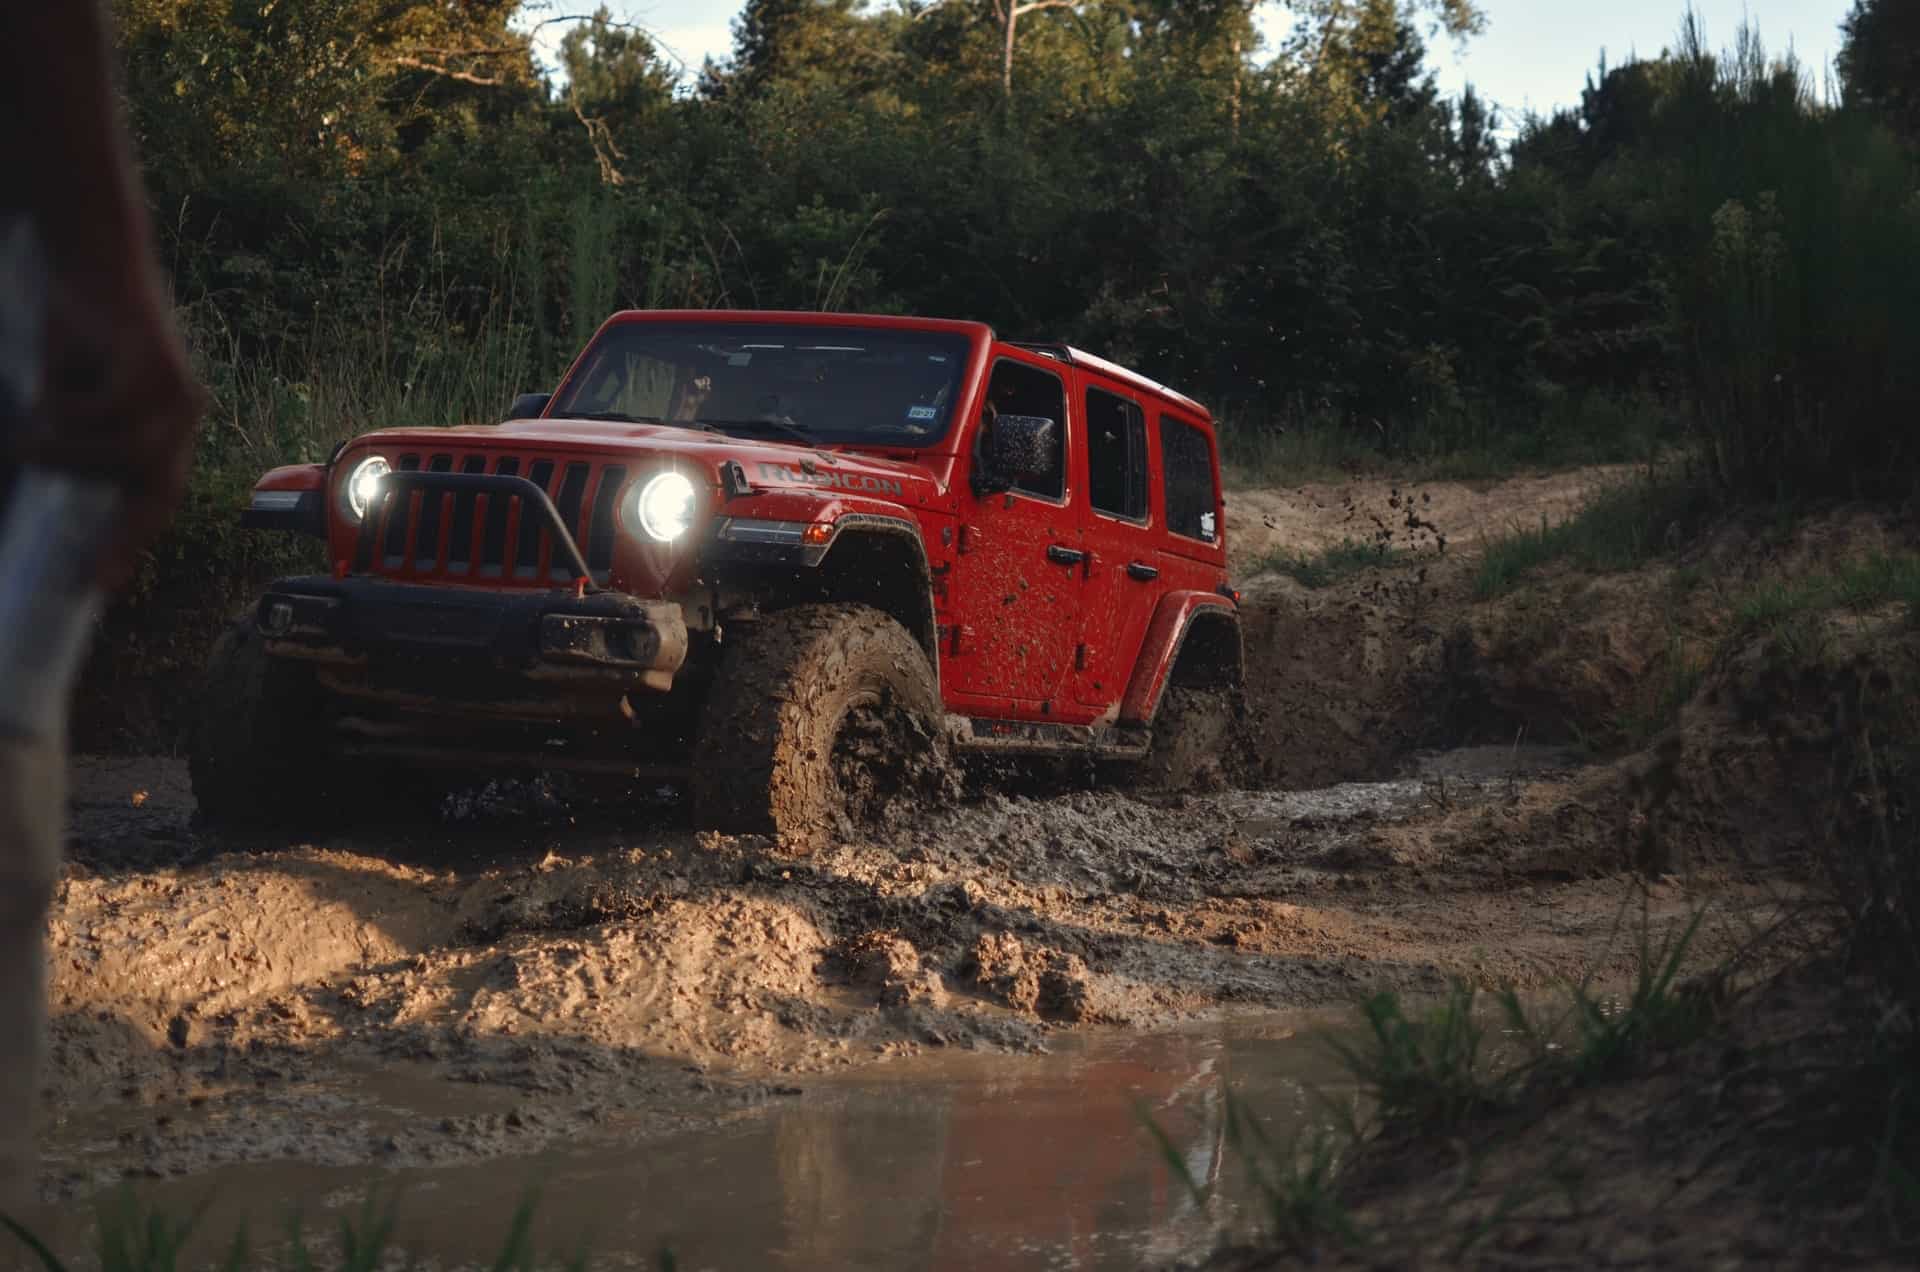 Off-road car insurance for off-roading – what does it consist of?